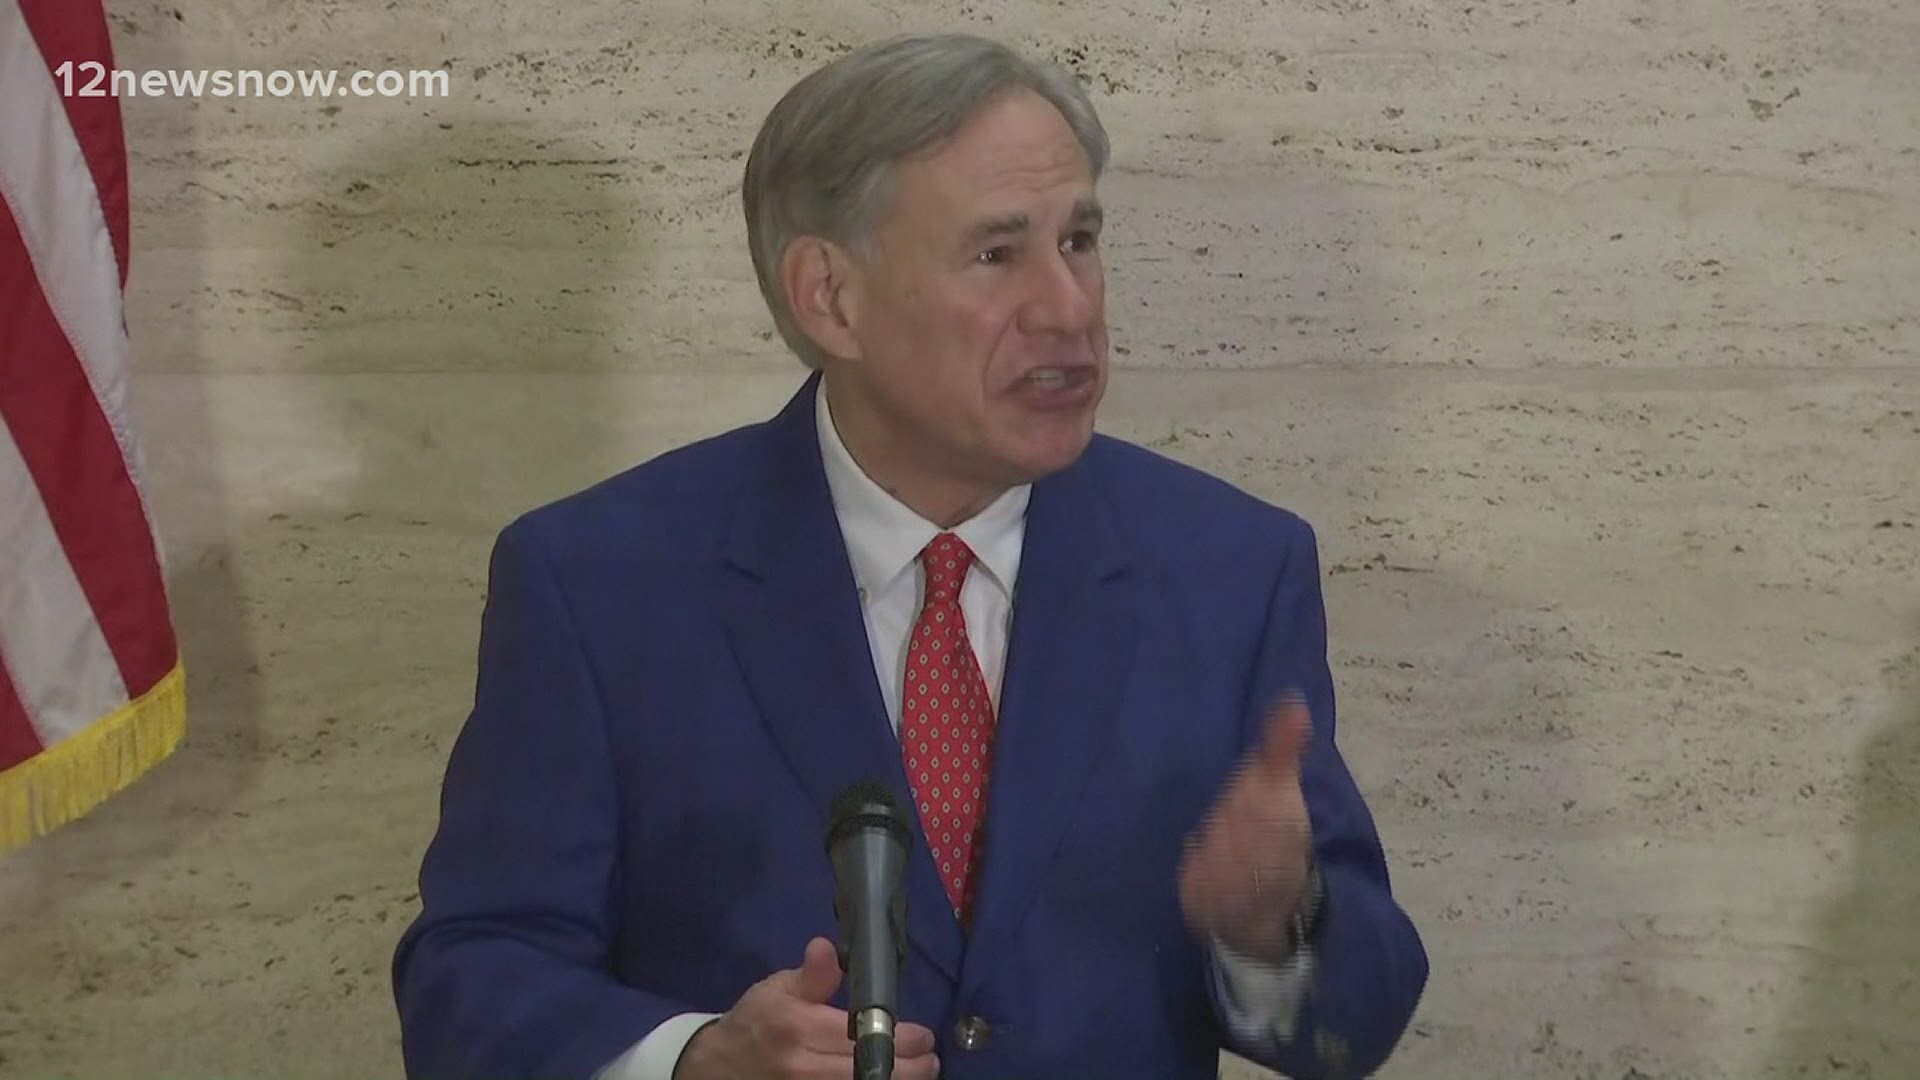 Don't mess with Texas is the message Gov. Greg Abbott is sending. On Friday, he introduced a new social media censorship bill.